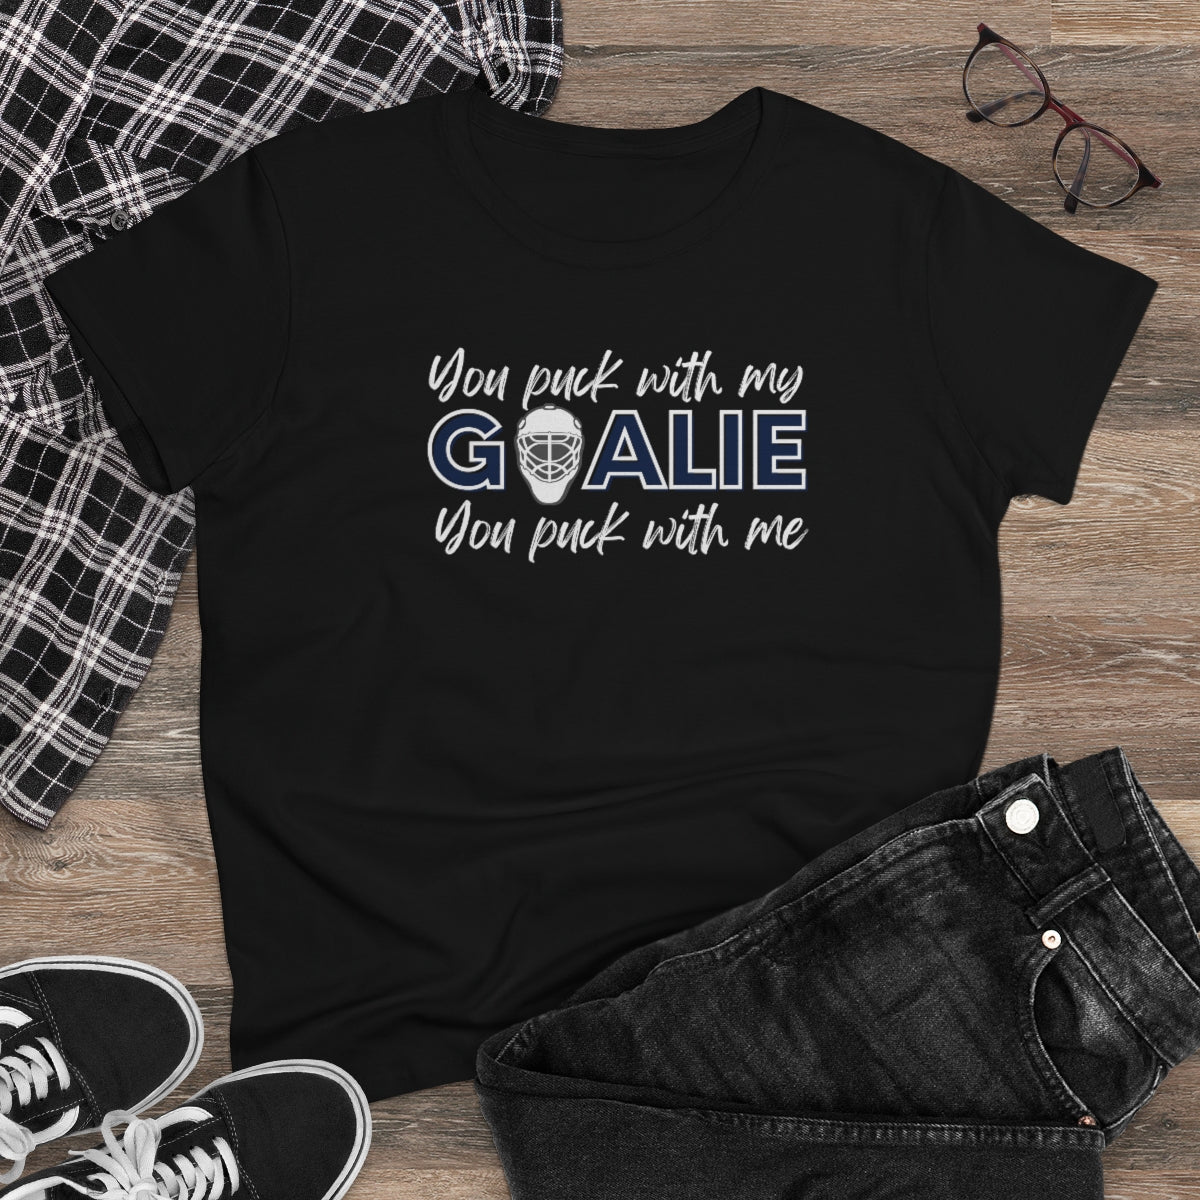 You puck with my Goalie - You puck with me - Ladies Tee